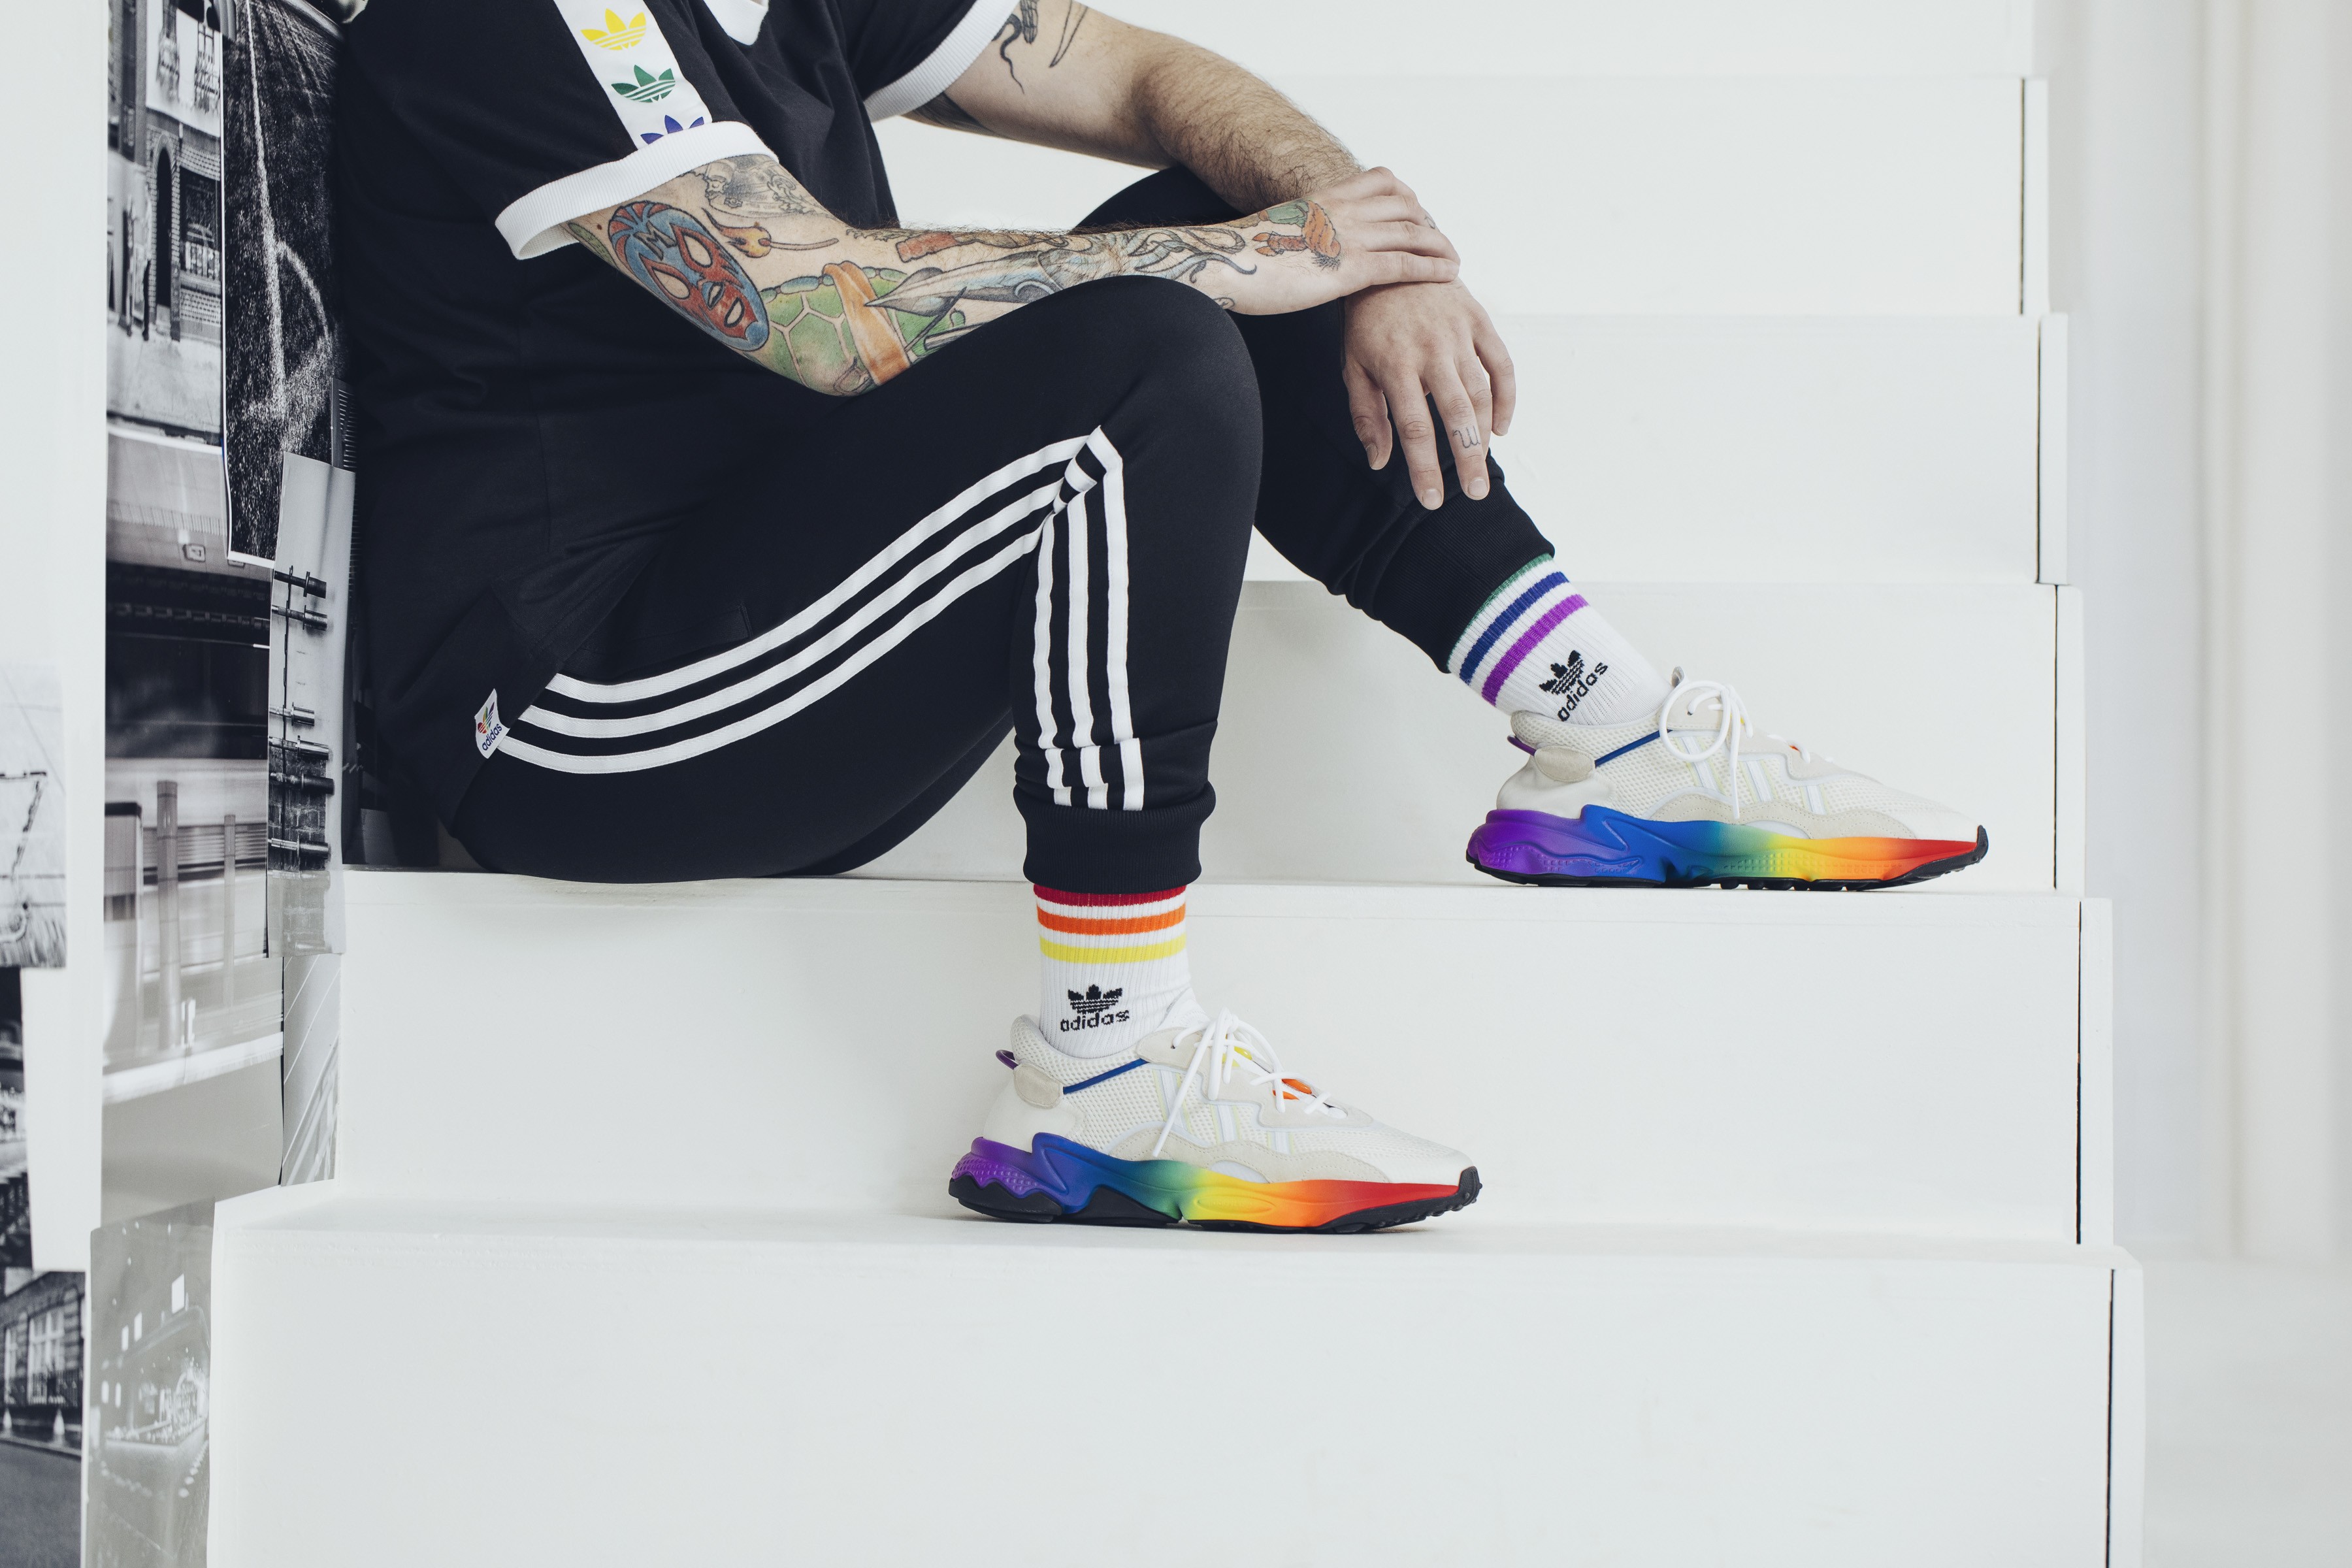 Danubio Ejecutable Descarte Adidas Pride Collection 2019: a collection marked by the LGBTQ community |  City Magazine